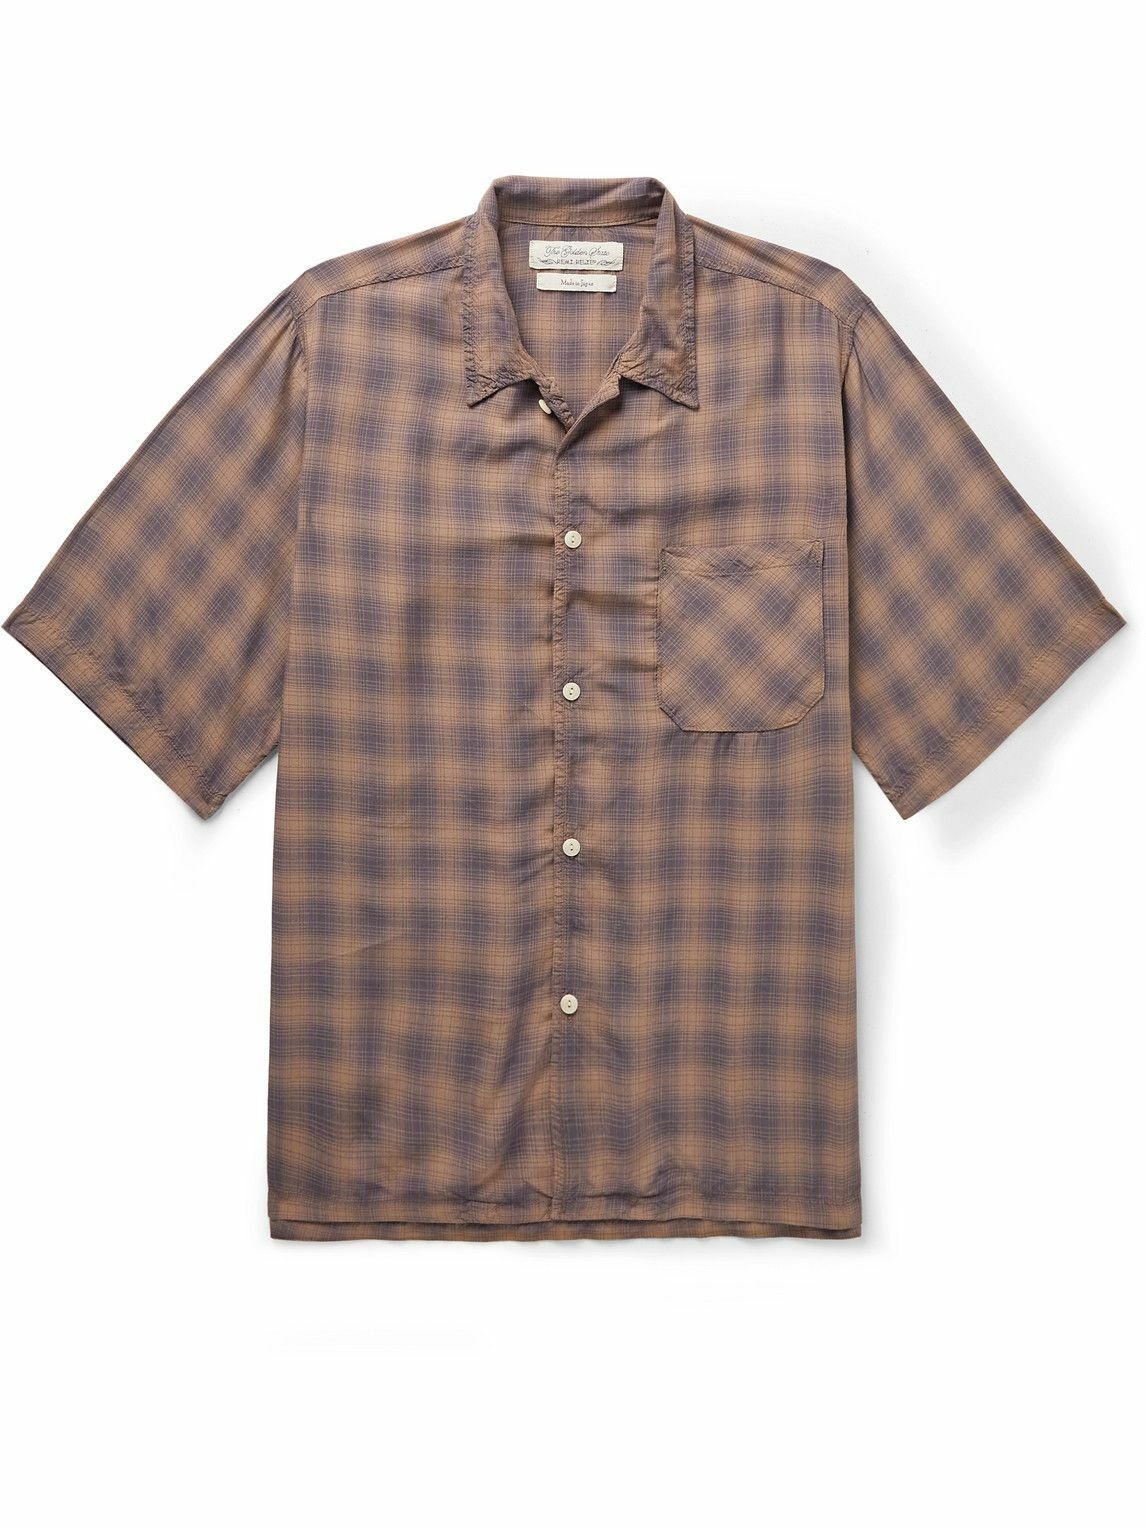 Remi Relief - Checked Flannel Shirt - Brown Remi Relief